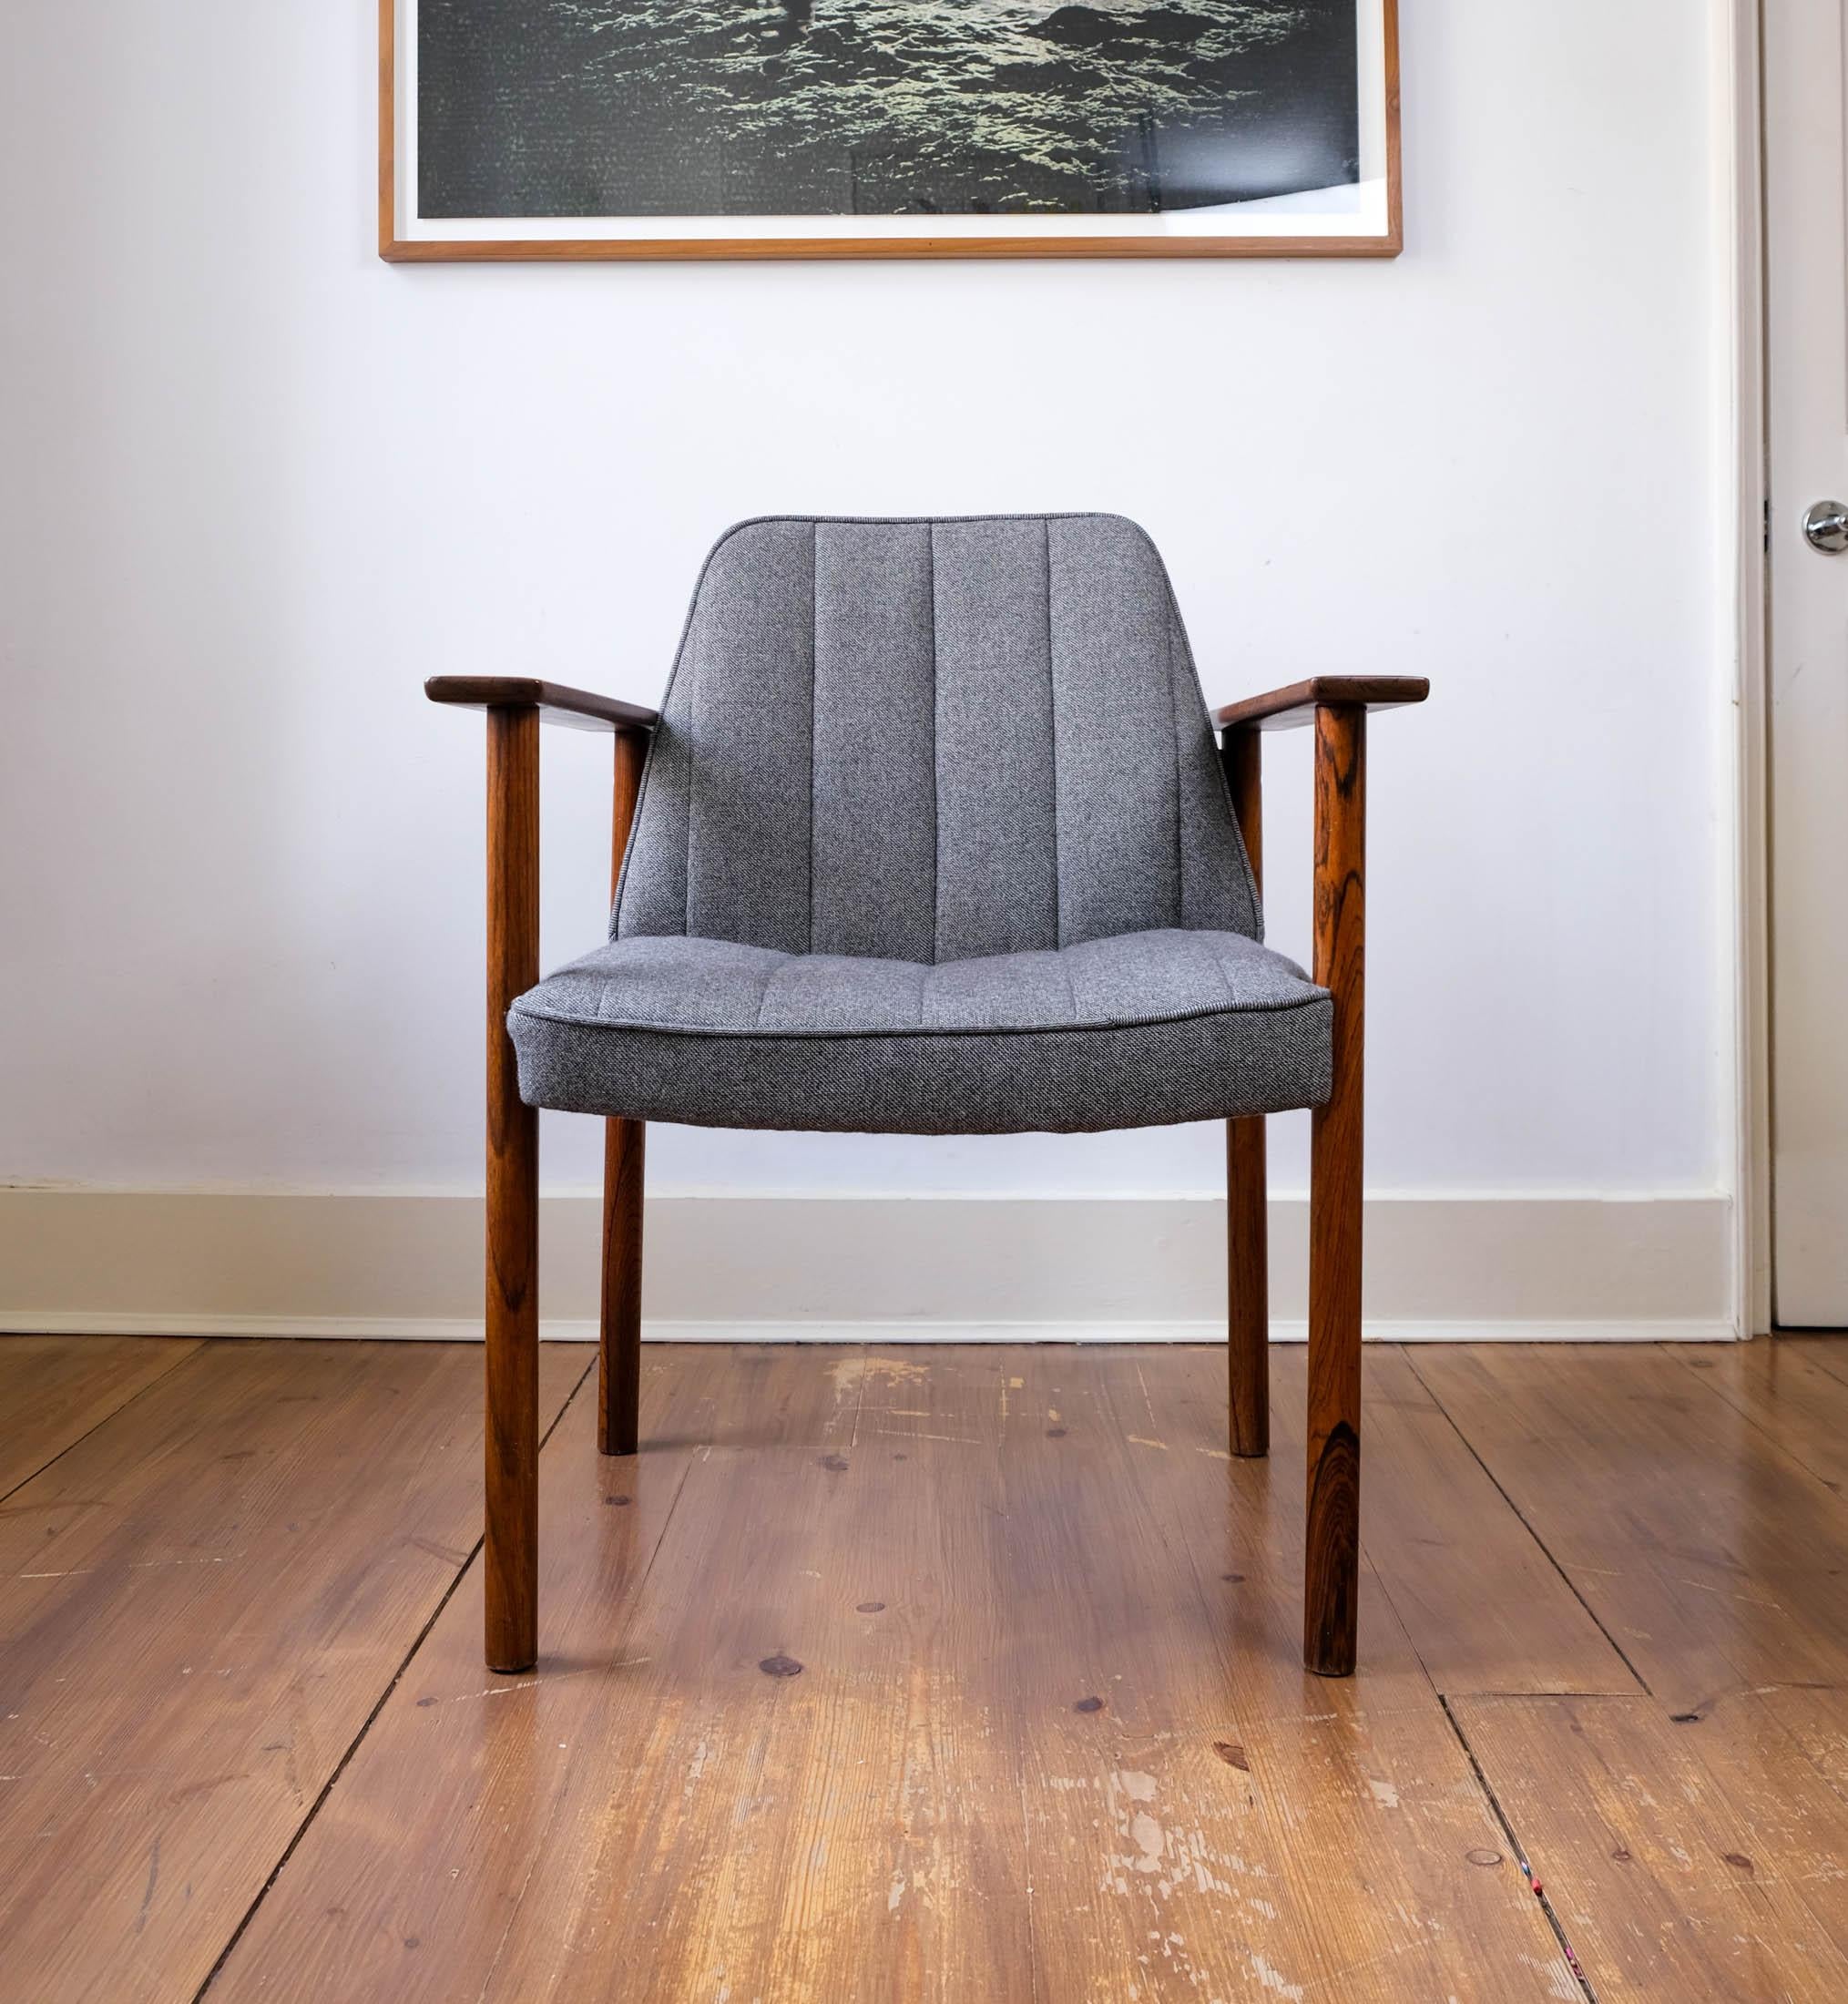 For sale a stunning, rare and very stylish Model 3001 Rosewood armchair designed by Sven Ivar Dysthe For Dokka Møbler of Norway, circa 1960s.

The Brazilian Rosewood frame has a beautiful grain & depth and the chair has been recently upholstered